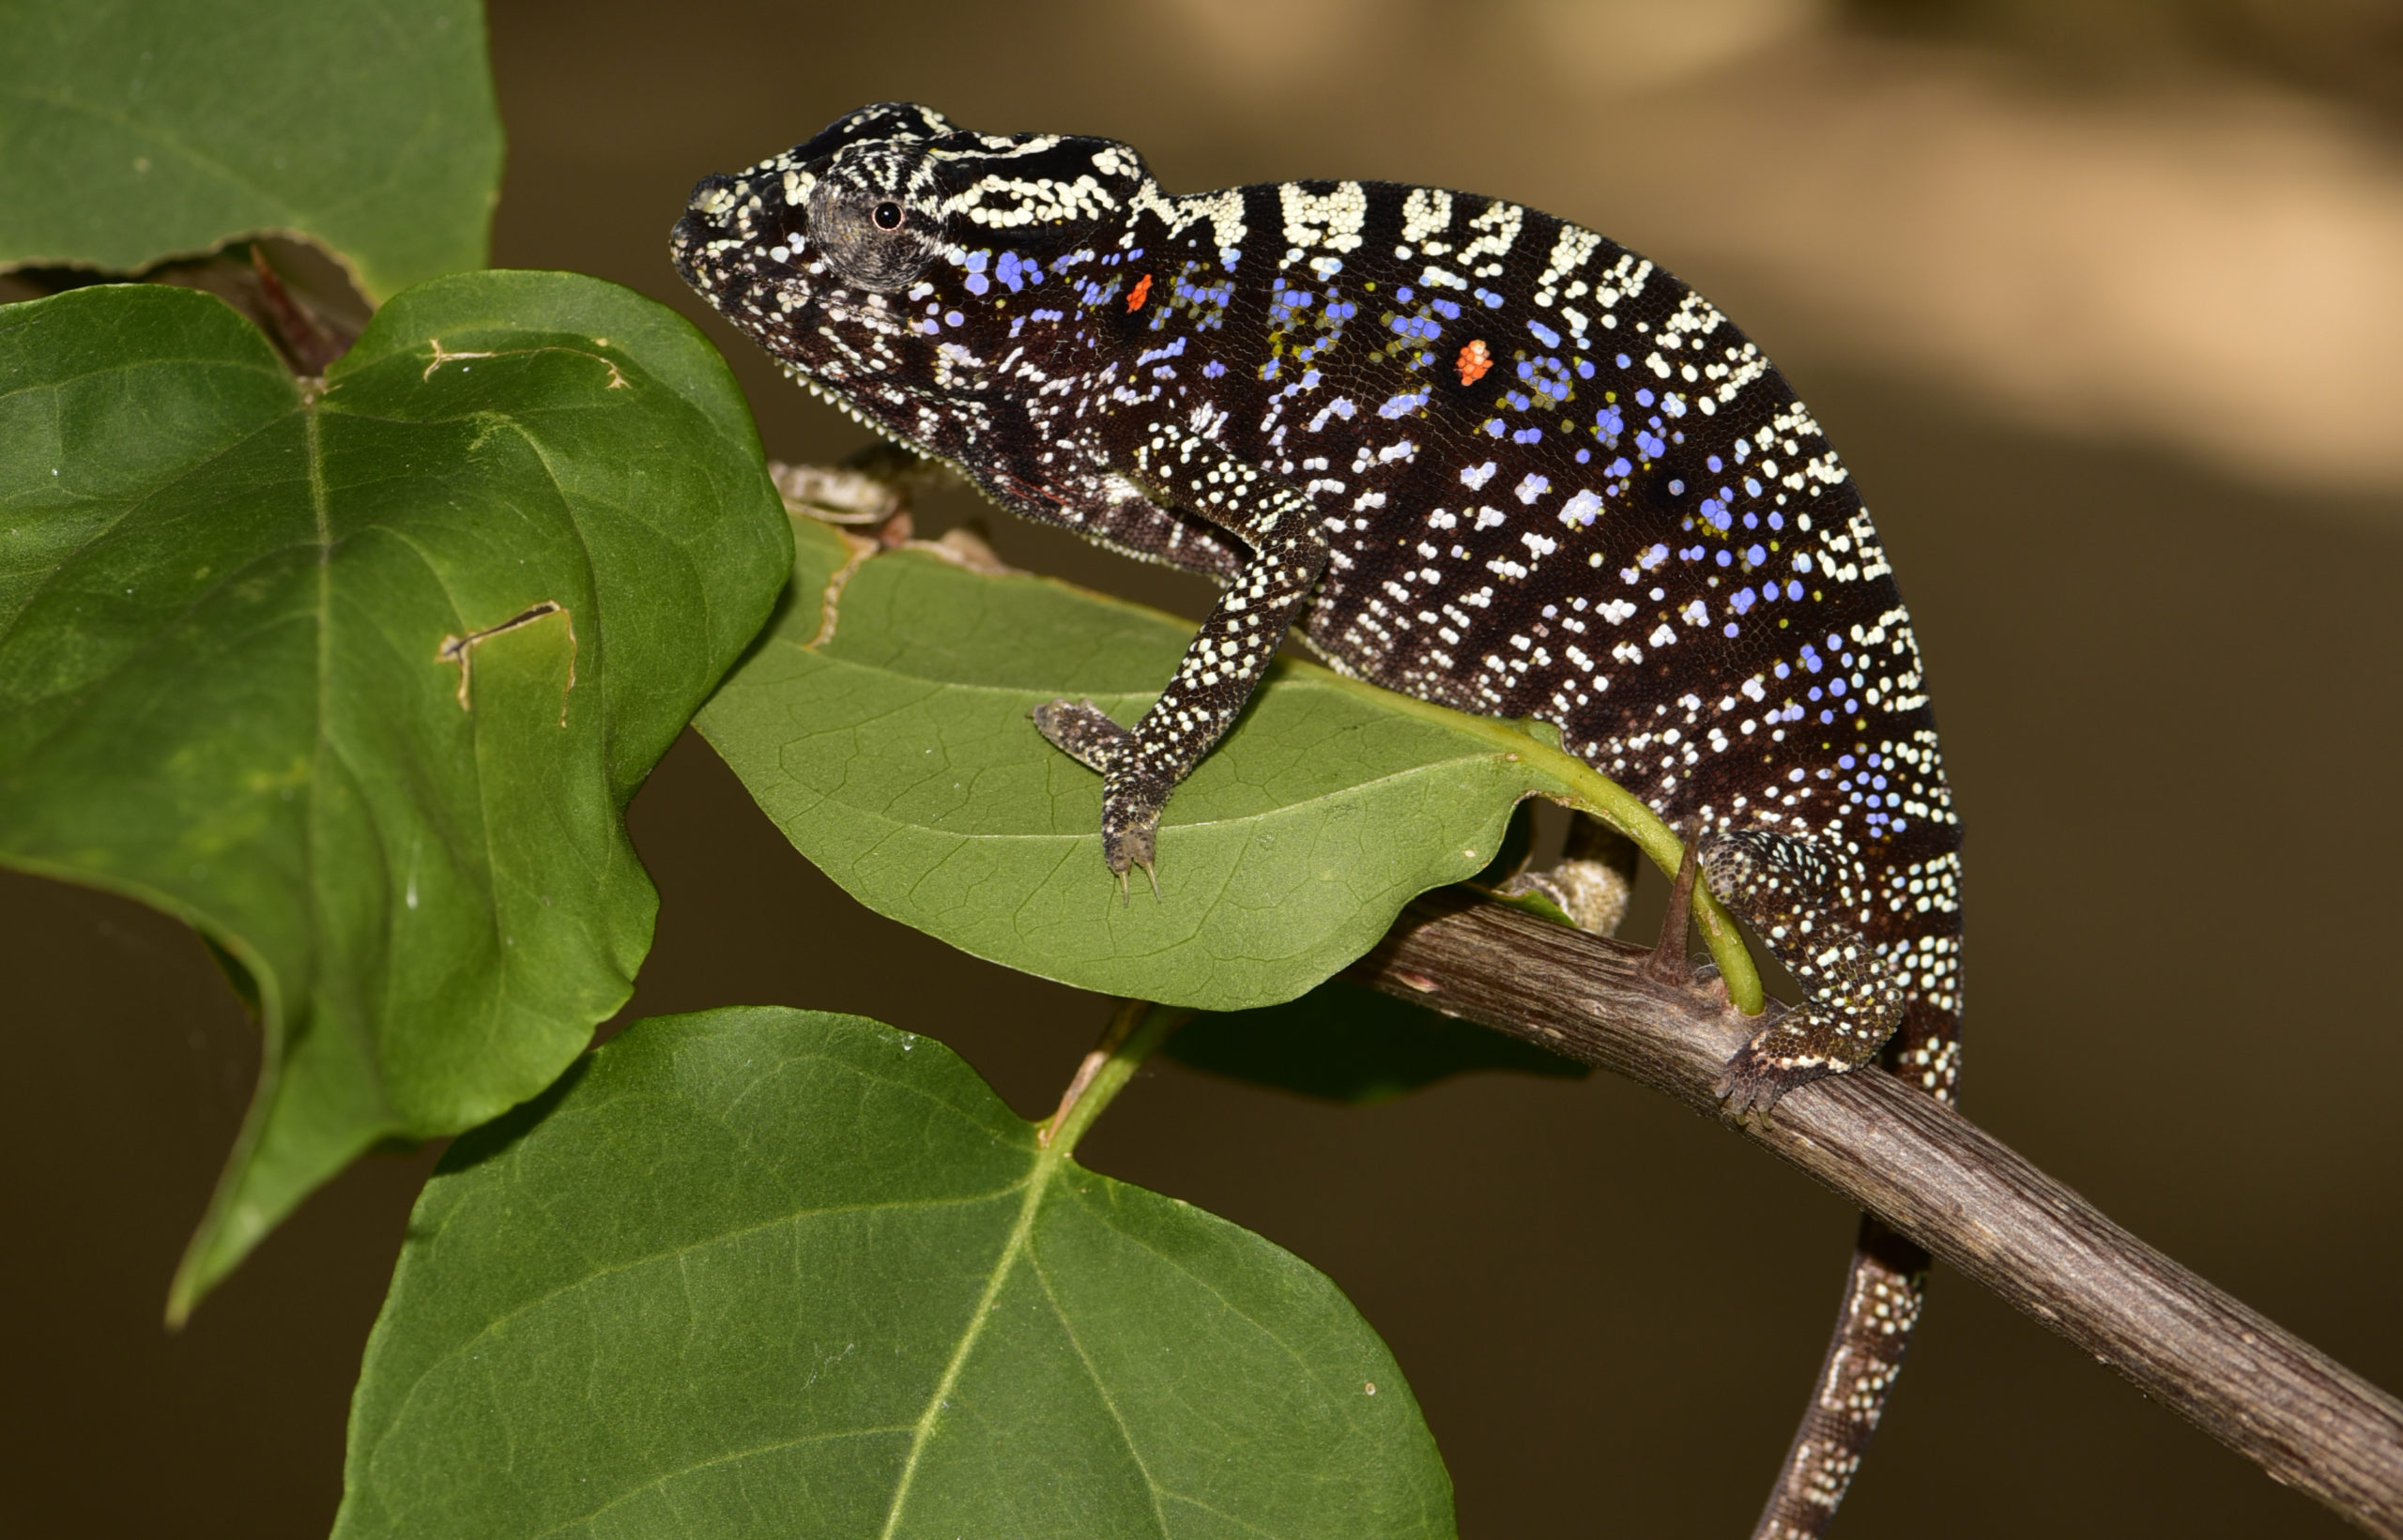 FOUND: Rediscovery of Lost Chameleon Reveals Reptile's (Spectacular) True  Colors - Global Wildlife Conservation